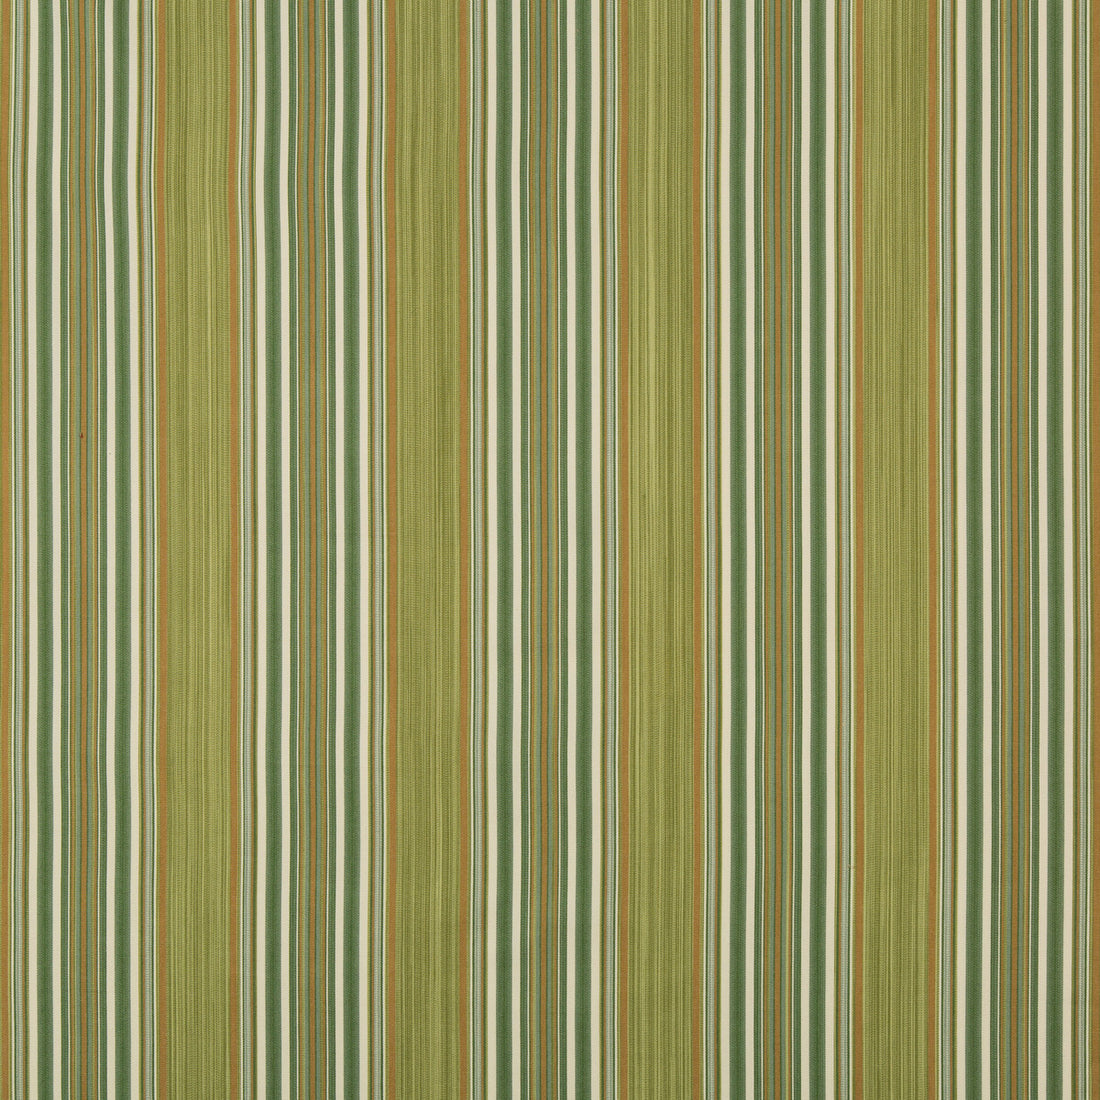 Vyne Stripe fabric in greenery color - pattern 2019103.233.0 - by Lee Jofa in the Manor House collection